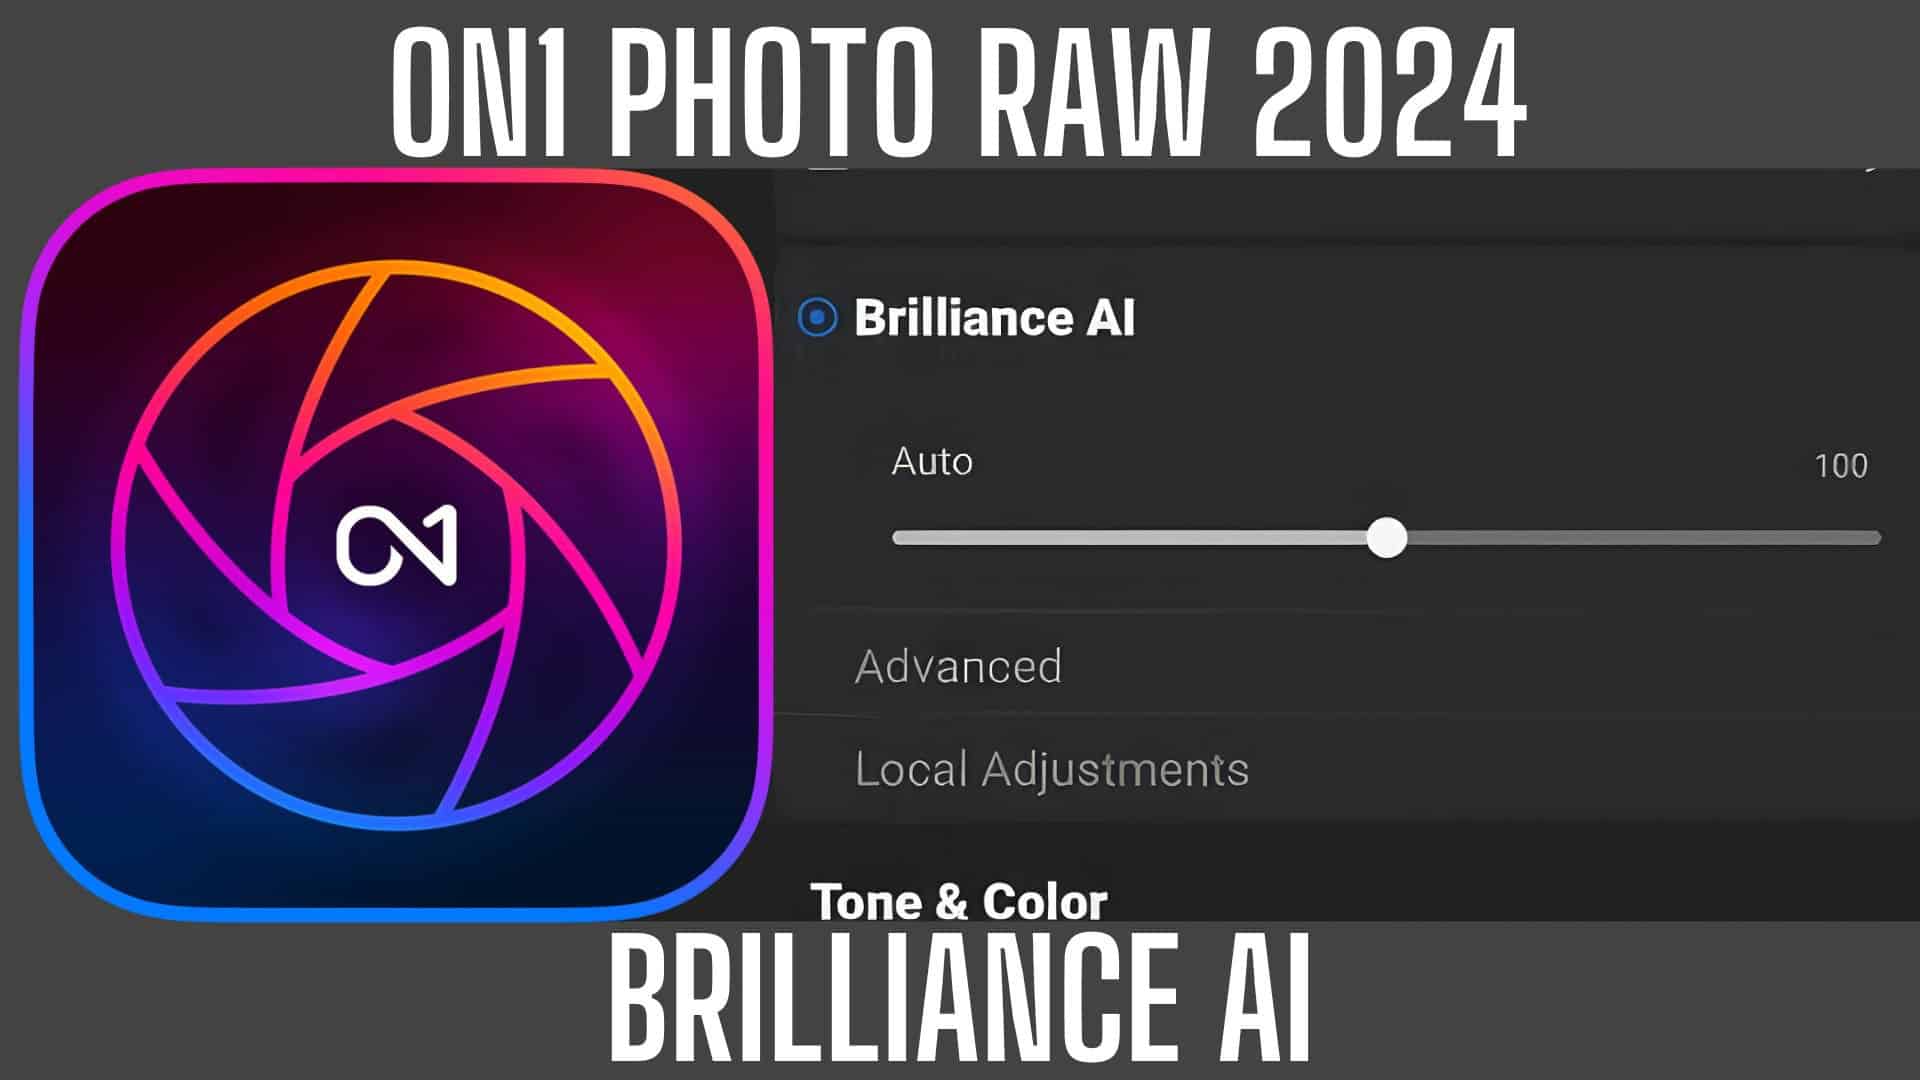 on1 photo raw 2024 Review Brilliance AI